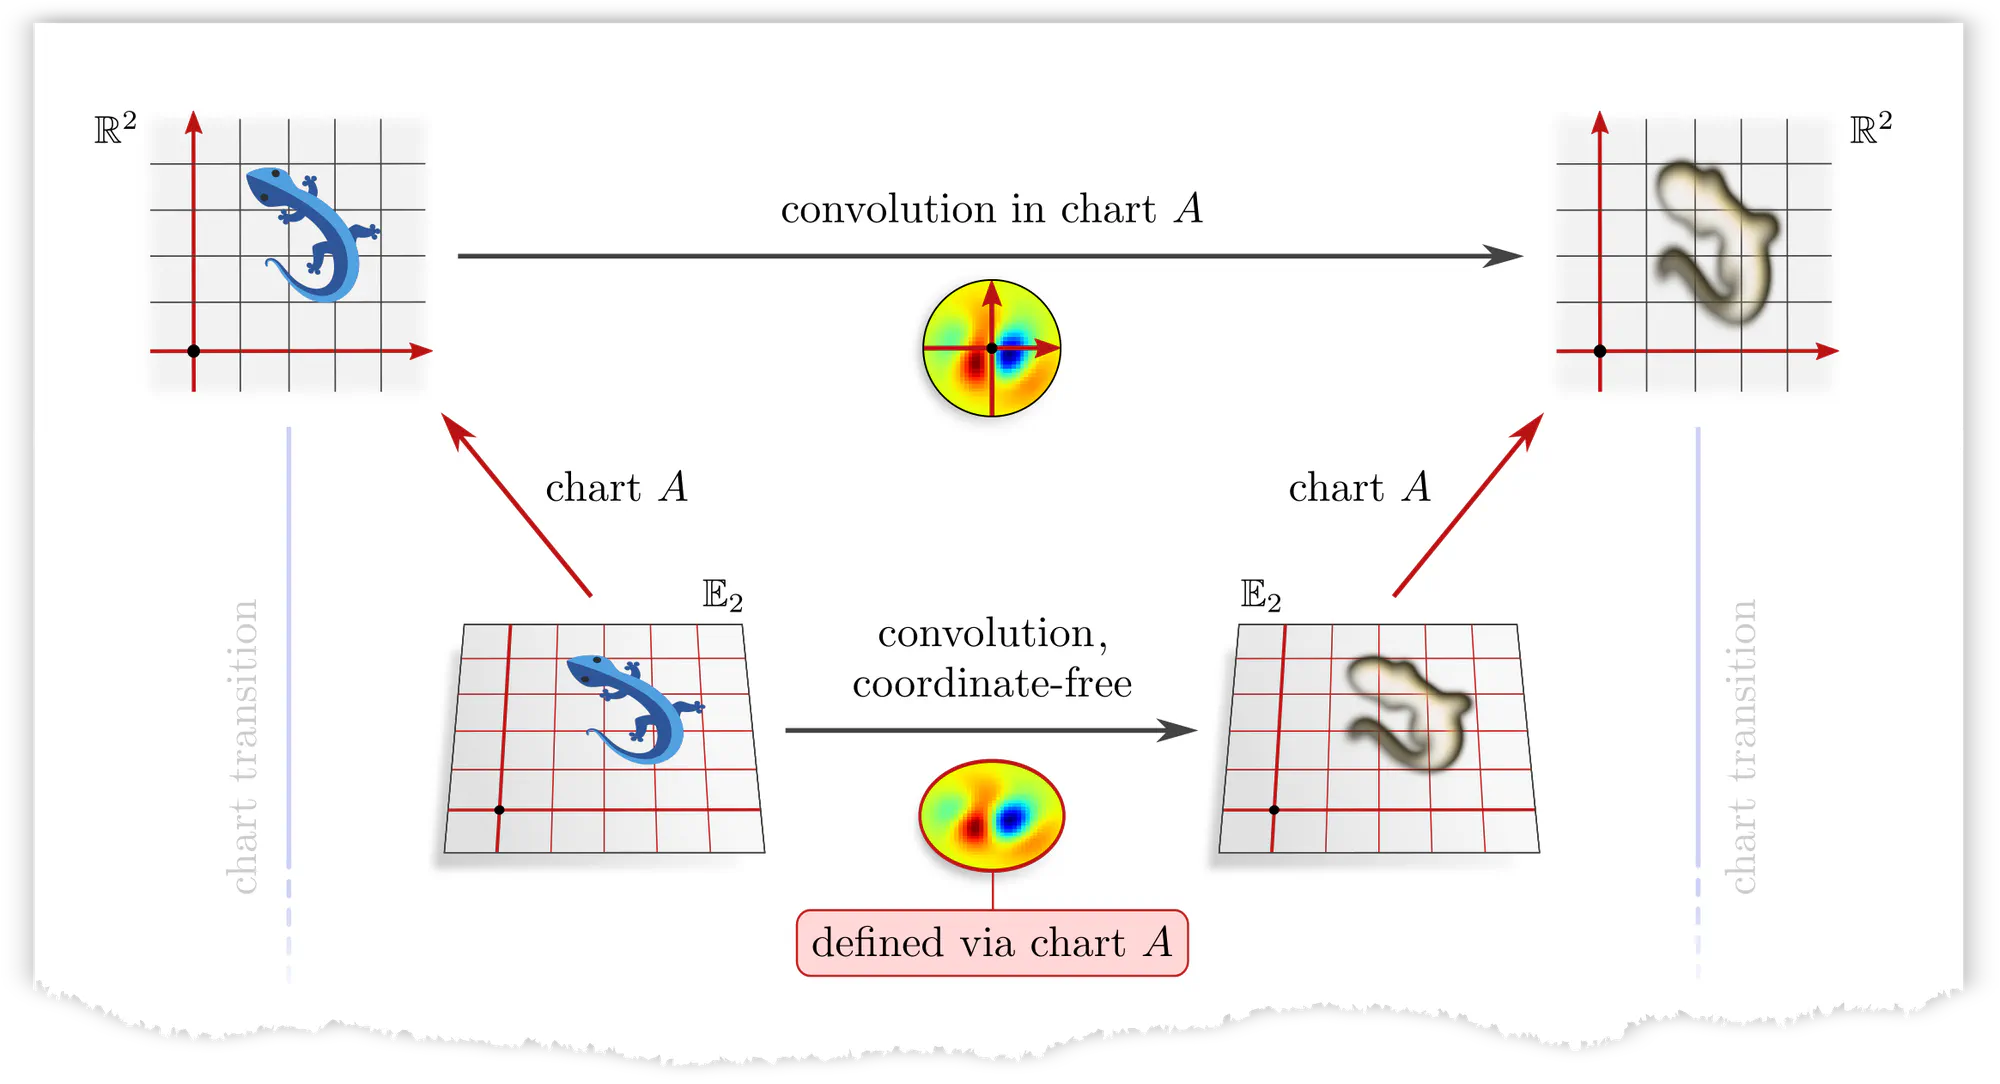 Convolution operation, defined by applying a given kernel in chart A.